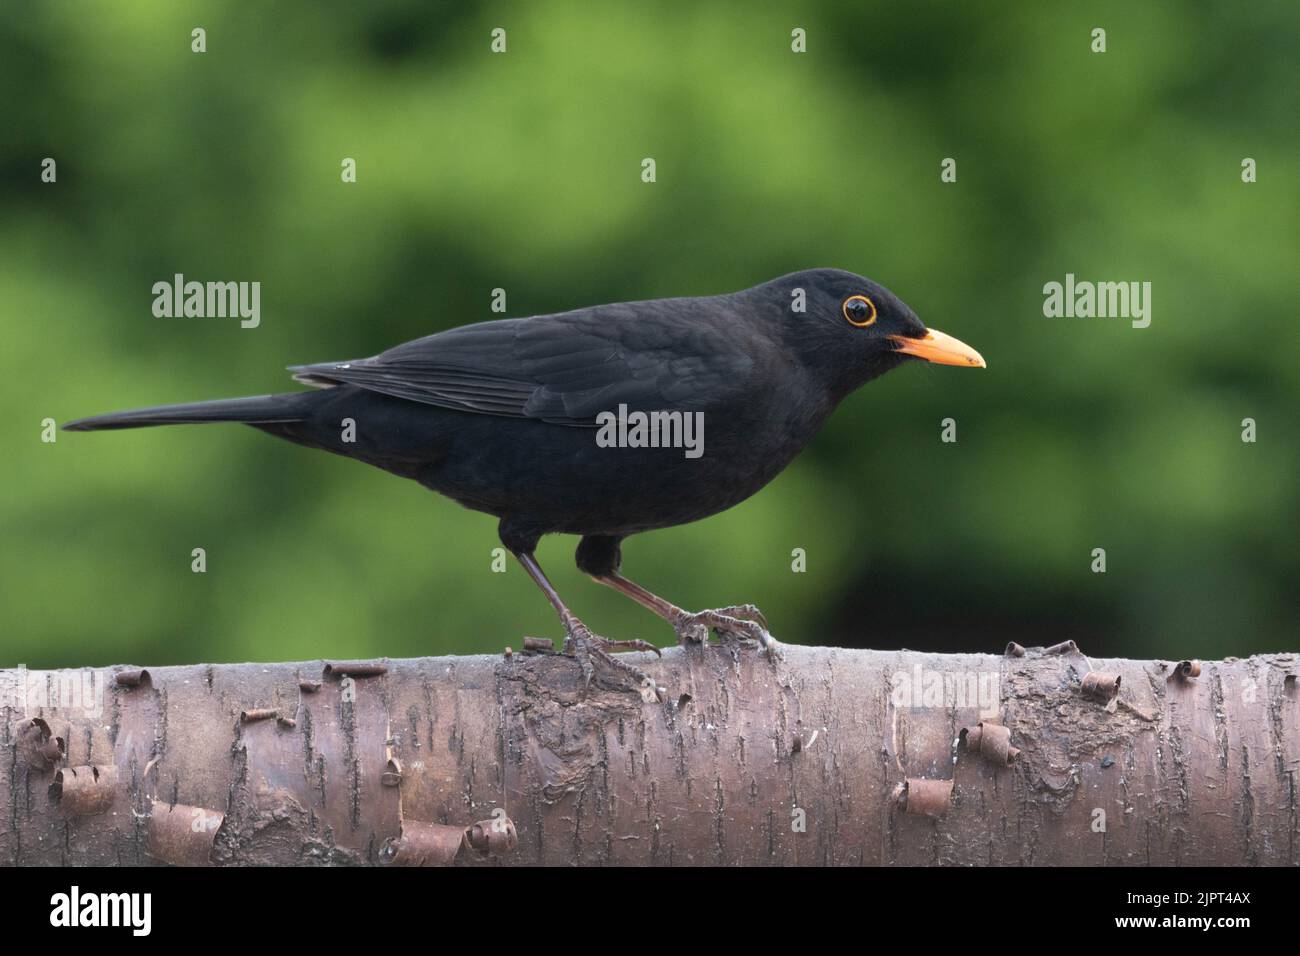 A male blackbird perched.  Taken in Monmouthshire, Wales, Uk. Stock Photo